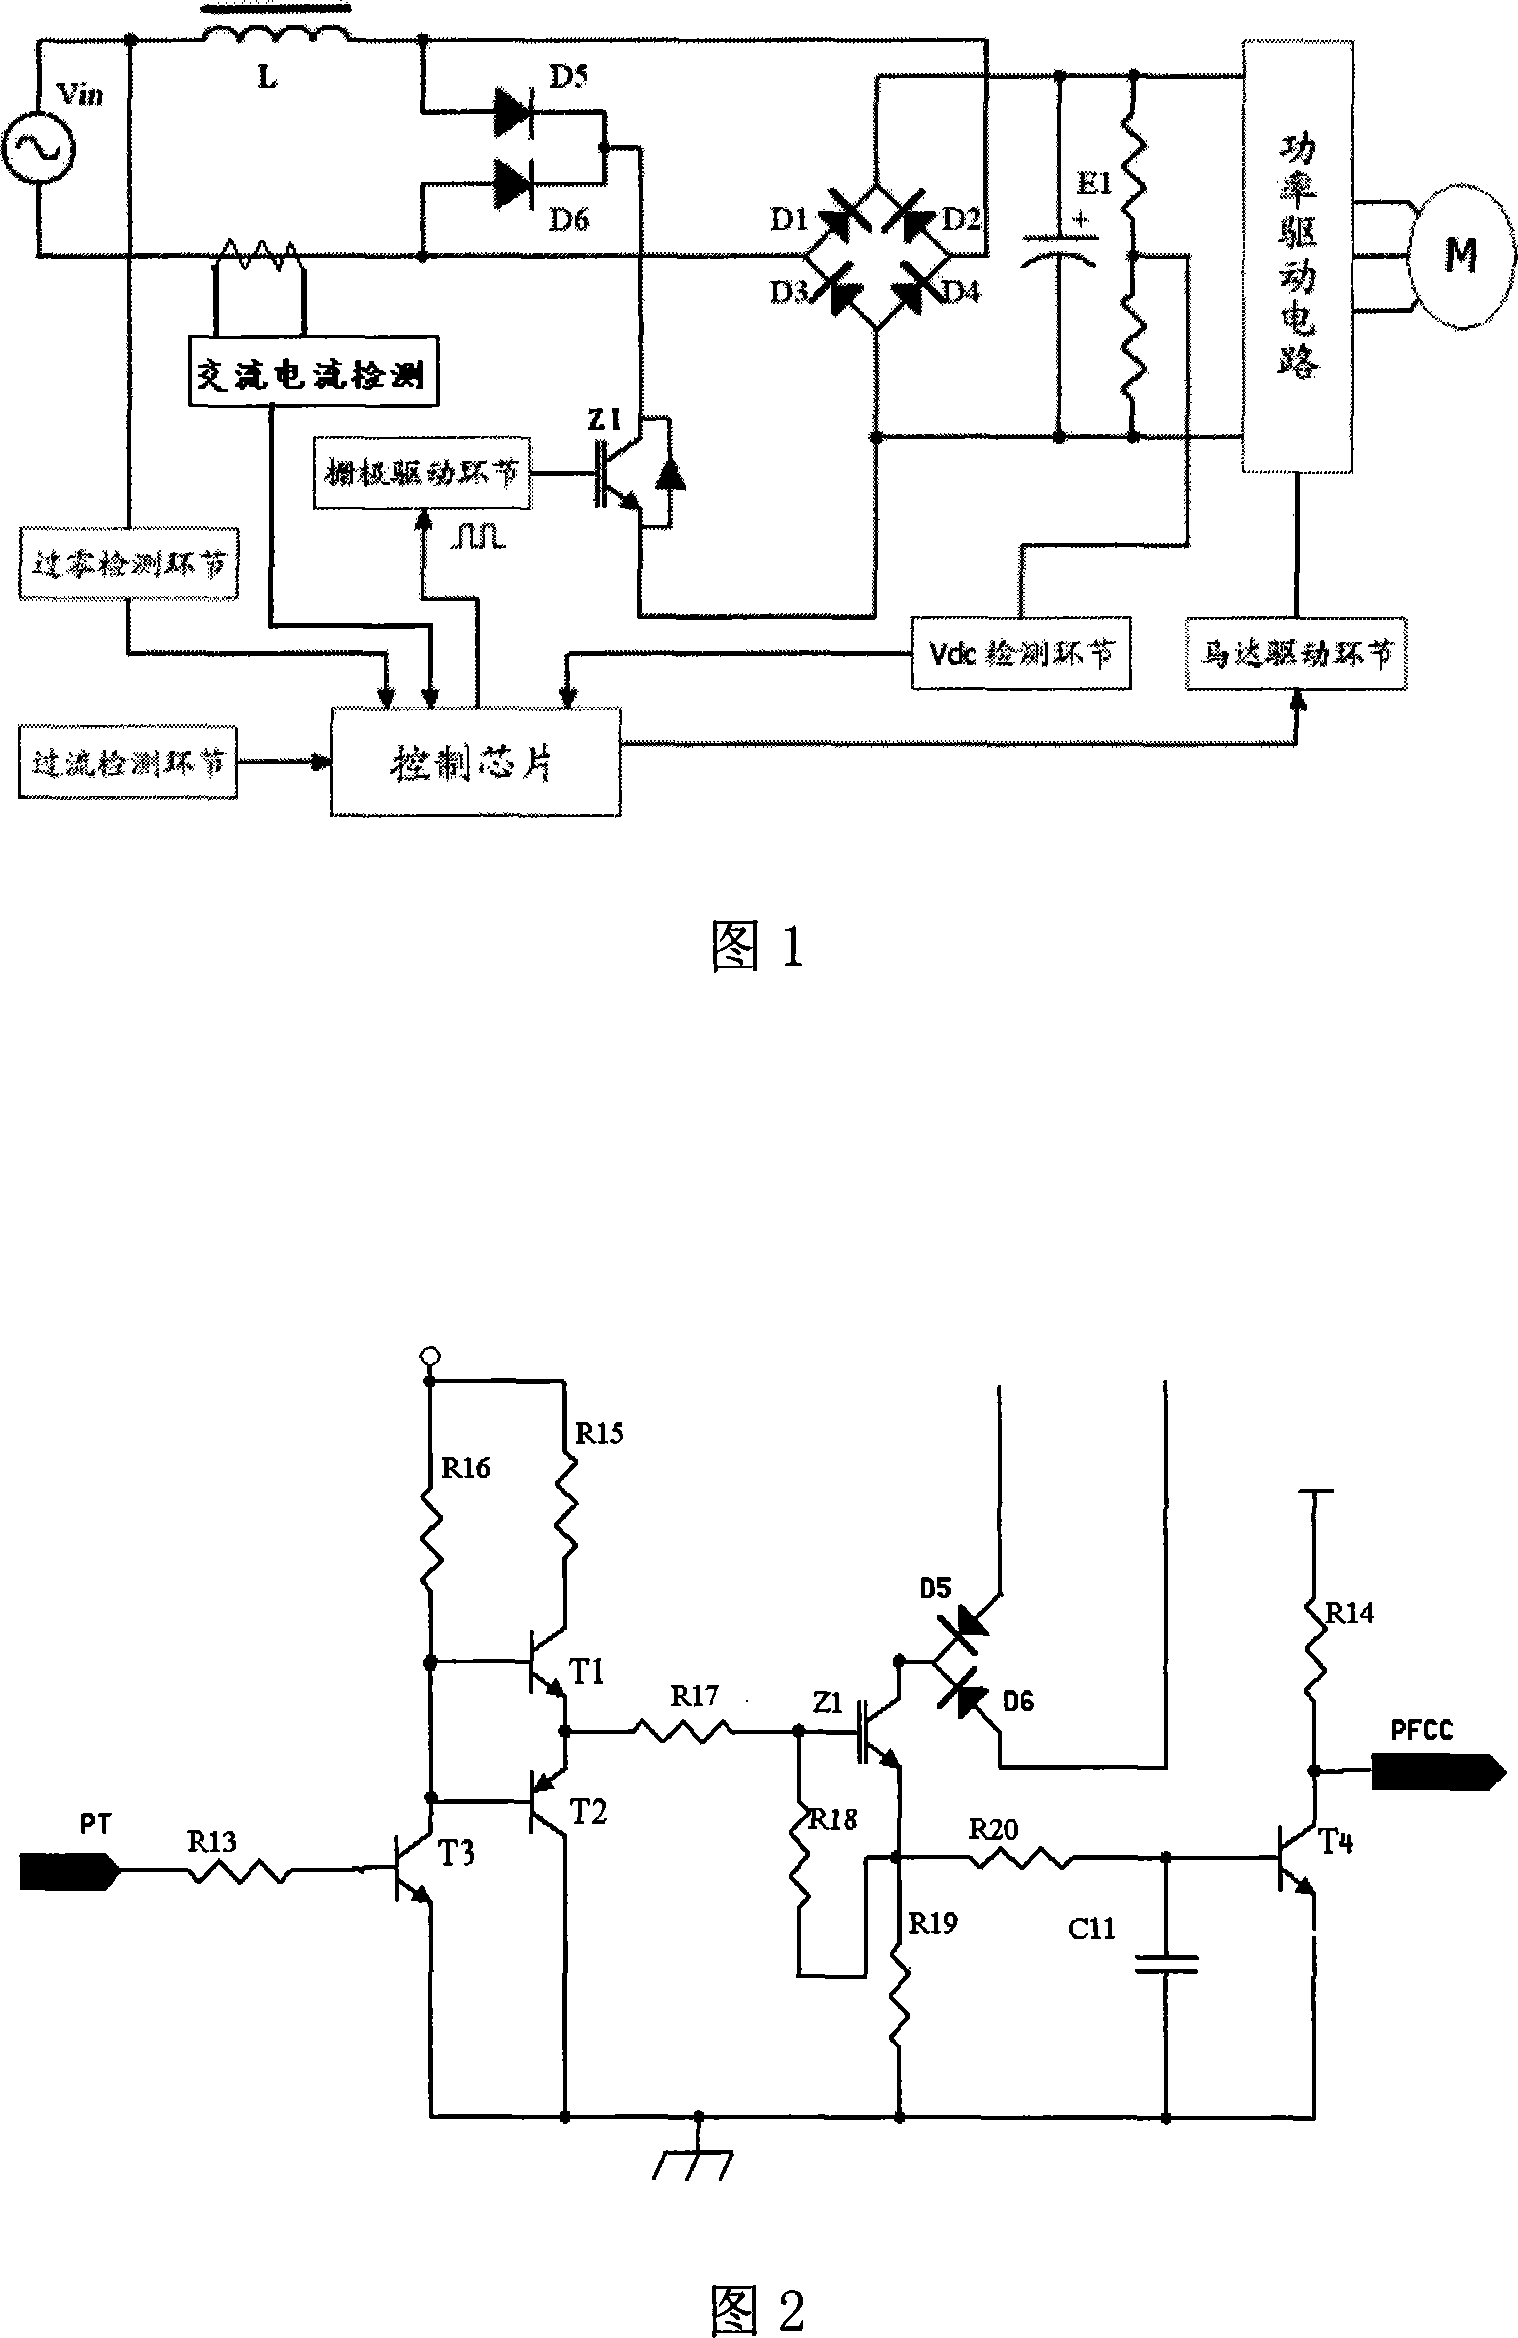 Method of DC power device for improving power factor and adjusting output voltage